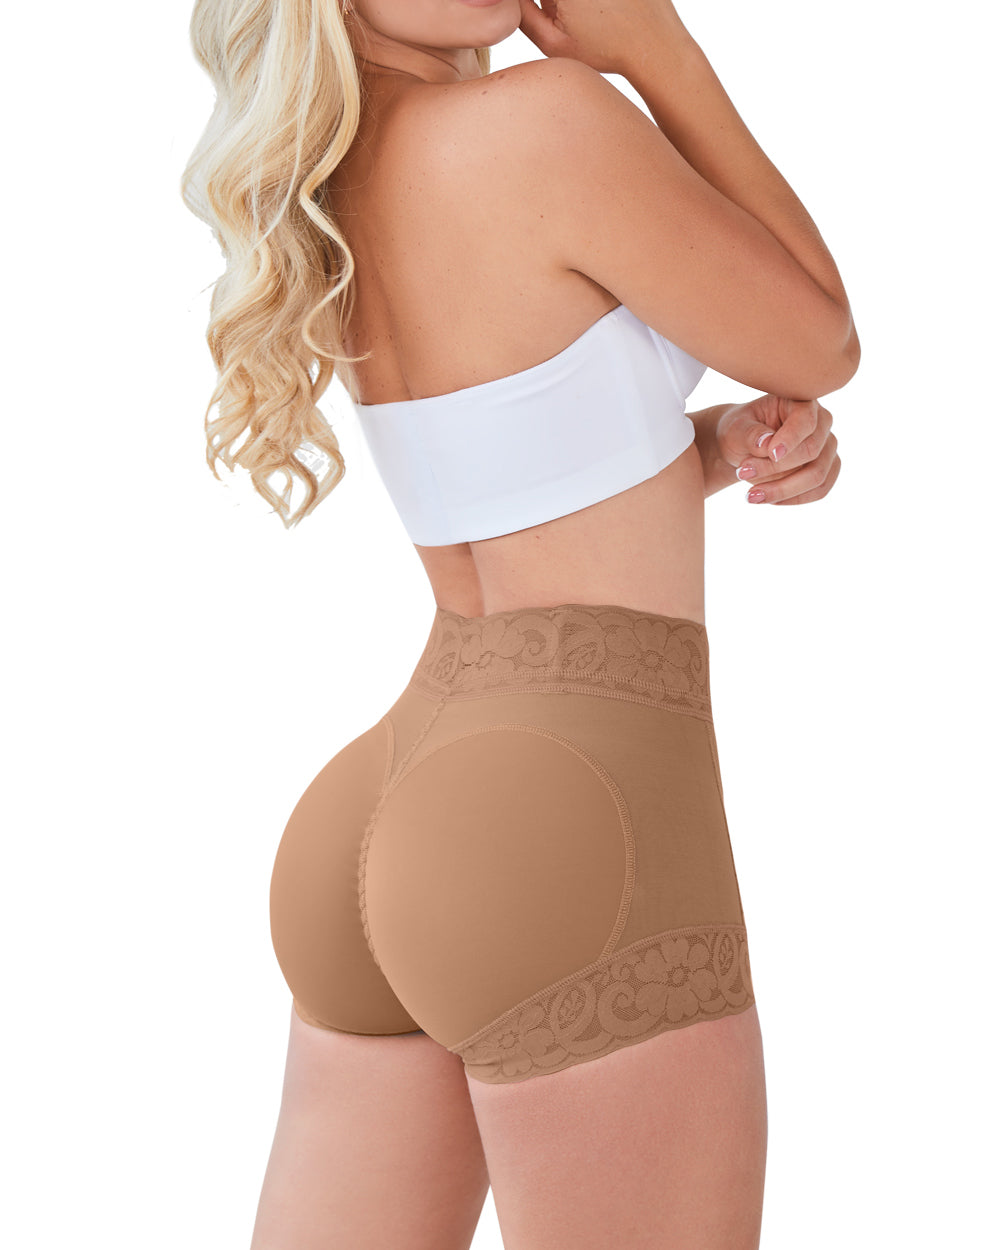 🔥Limited Time Sale 48% OFF🎉Women Lace Body Shaper Butt Lifter Panty-Buy 2 Get Free Shipping